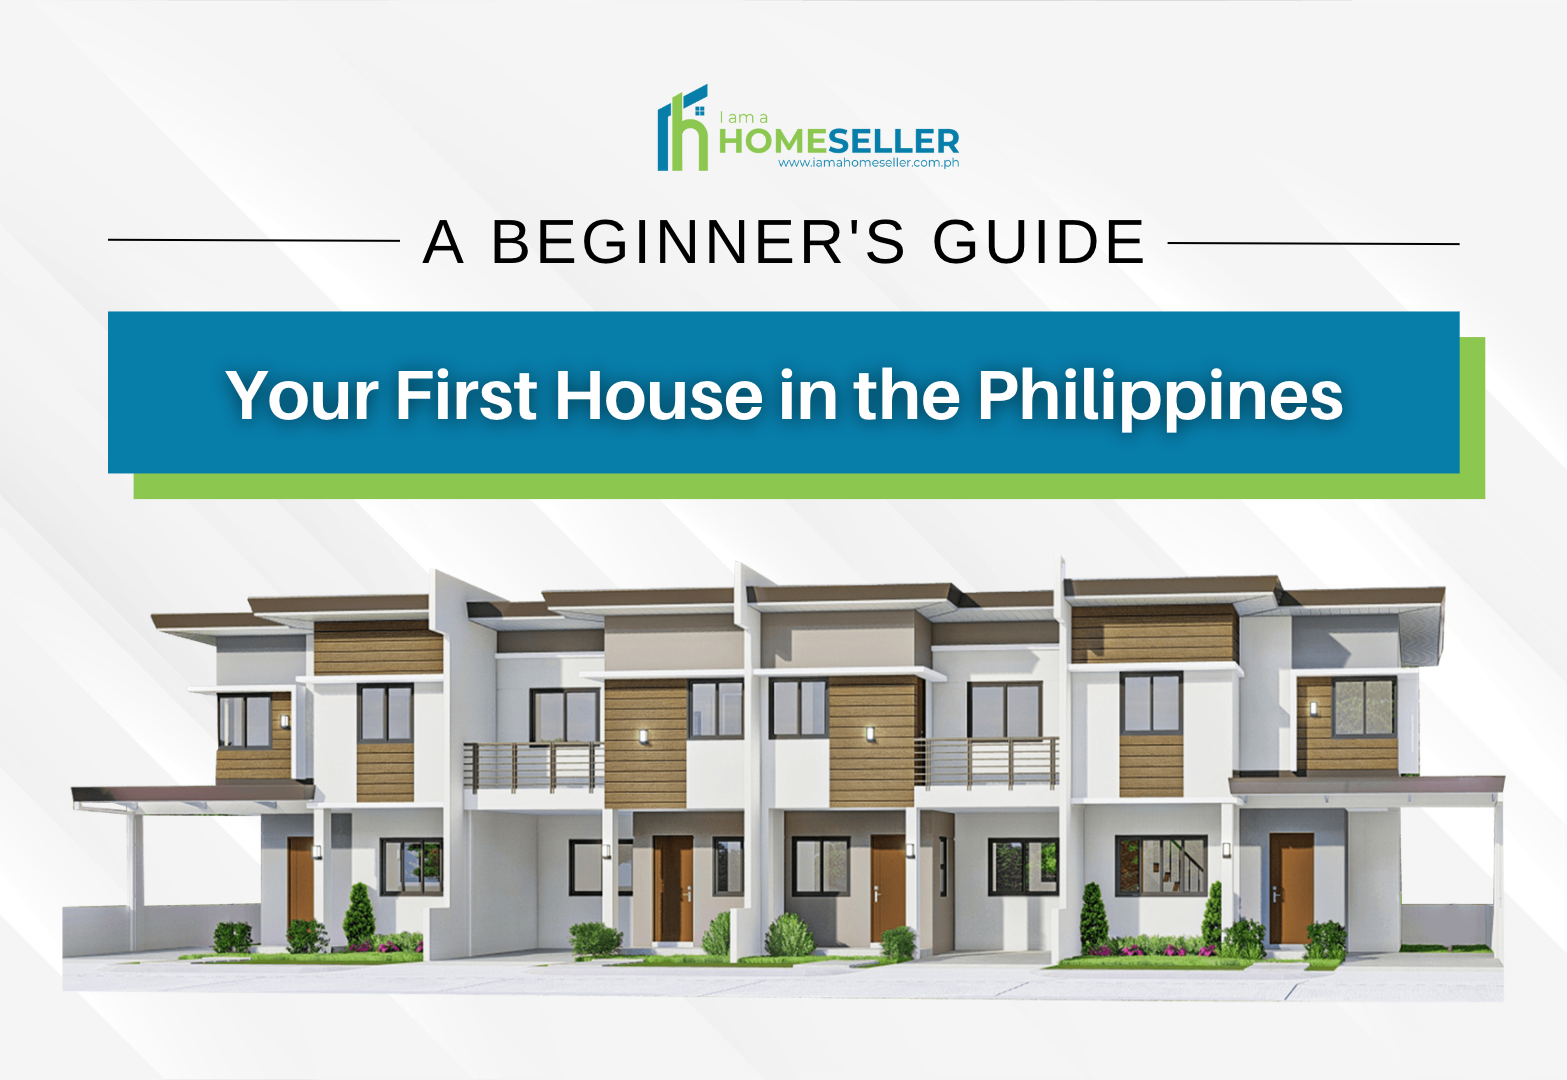 A Beginner's Guide to Buying Your First House in the Philippines